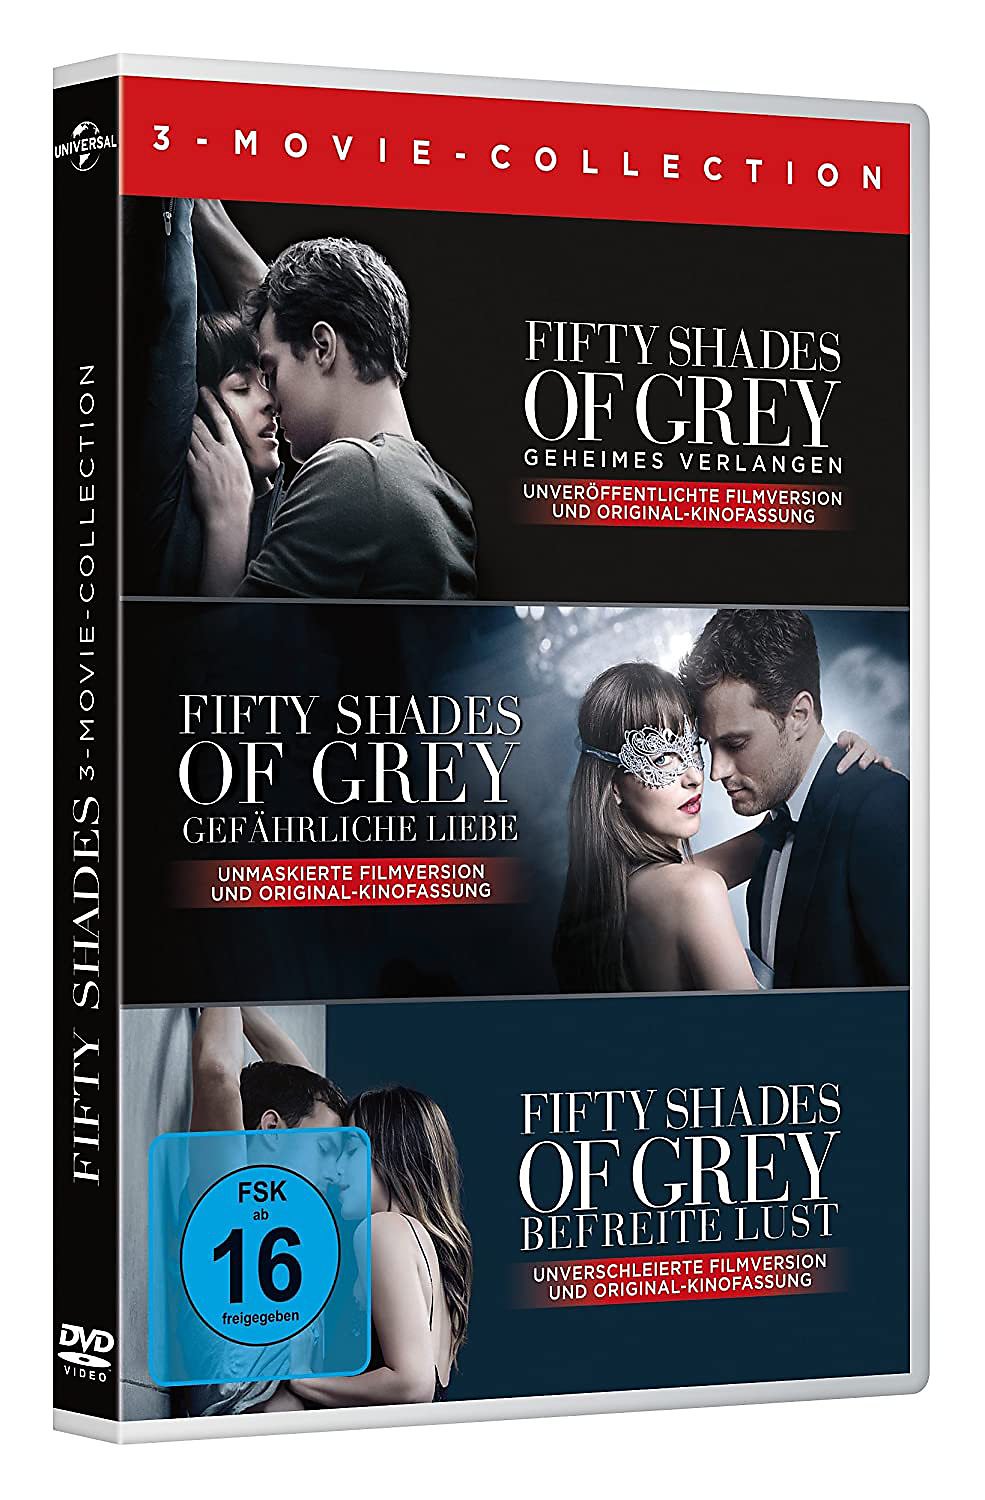 Dvd Fifty Shades Of Grey